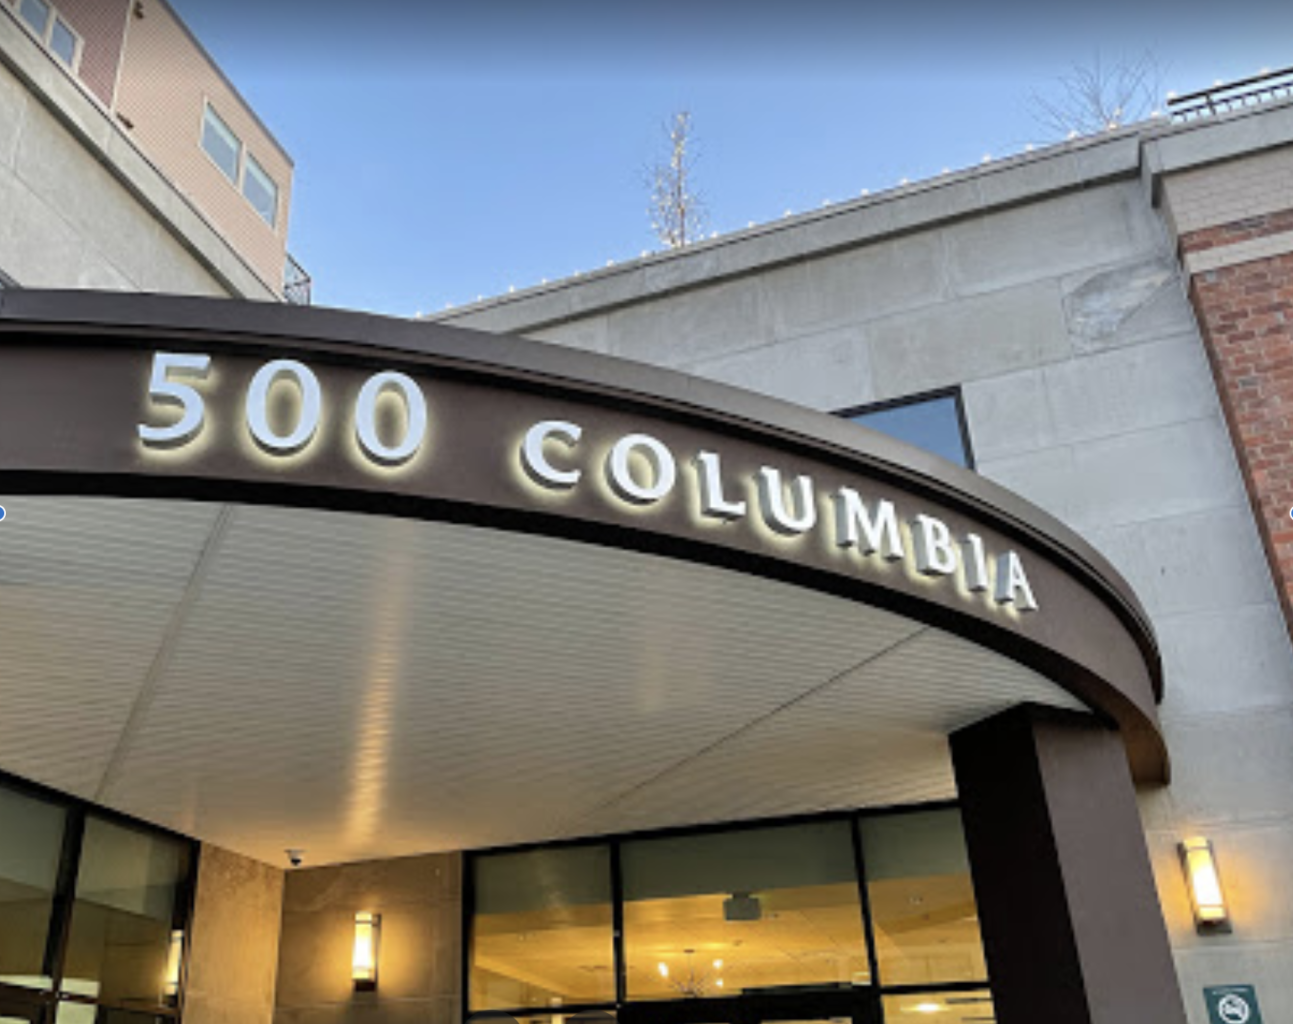 exterior of office building with signage reading "500 Columbia"